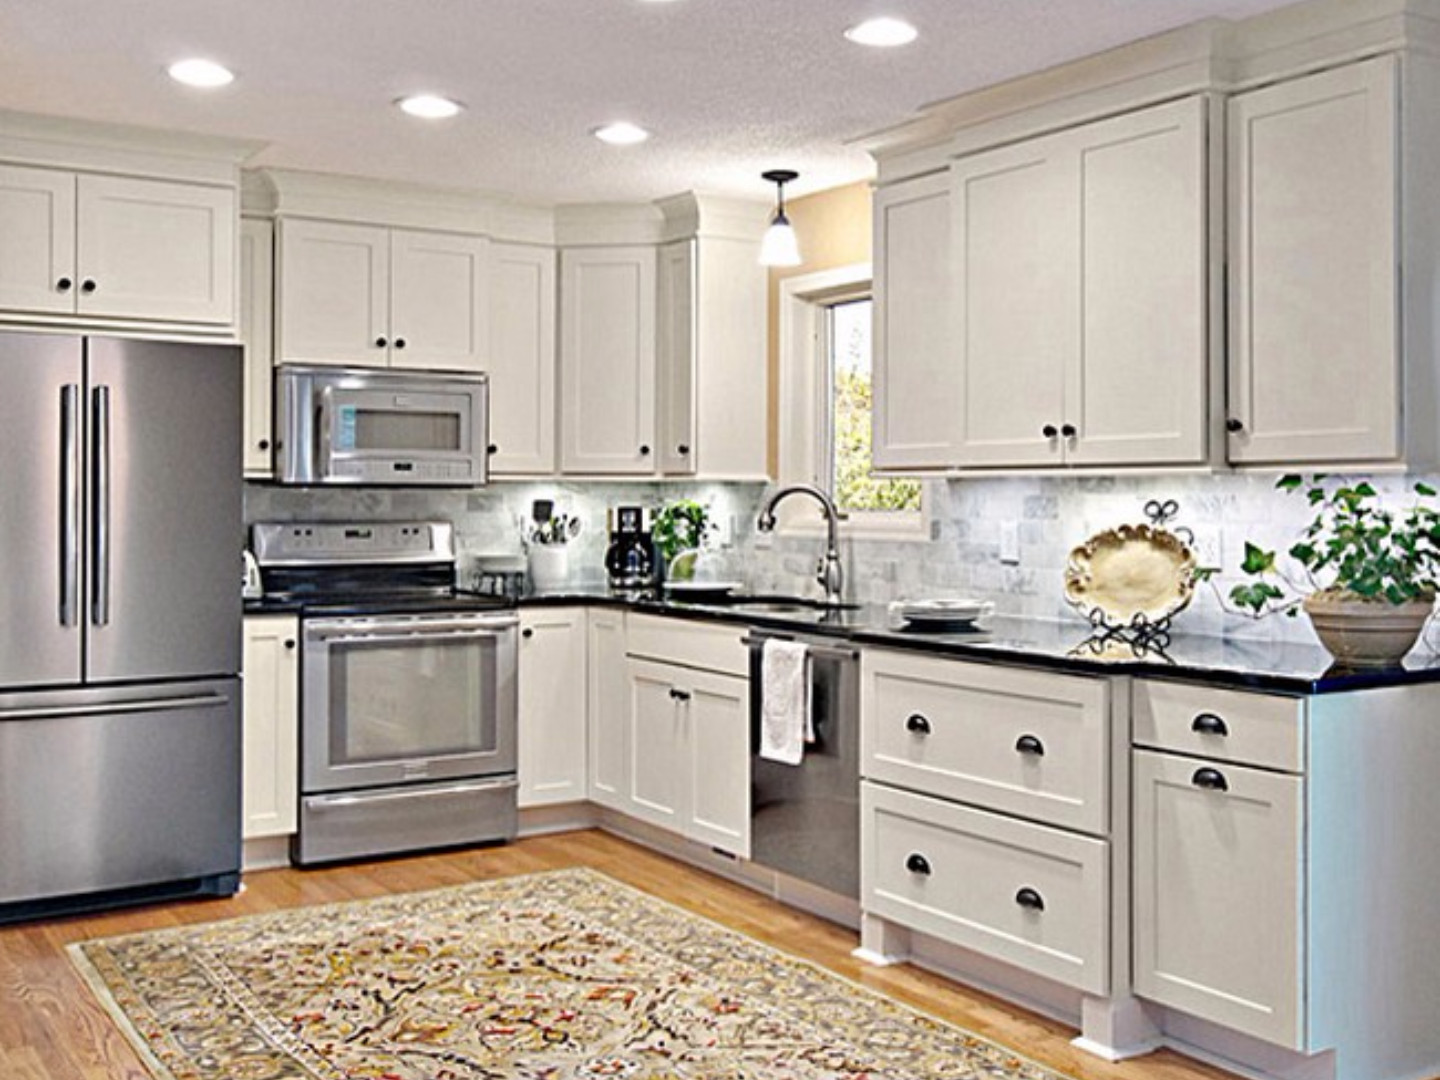 Painting Kitchen Cabinets
 Kitchen Cabinet Painting Castle Rock Painting Kitchen